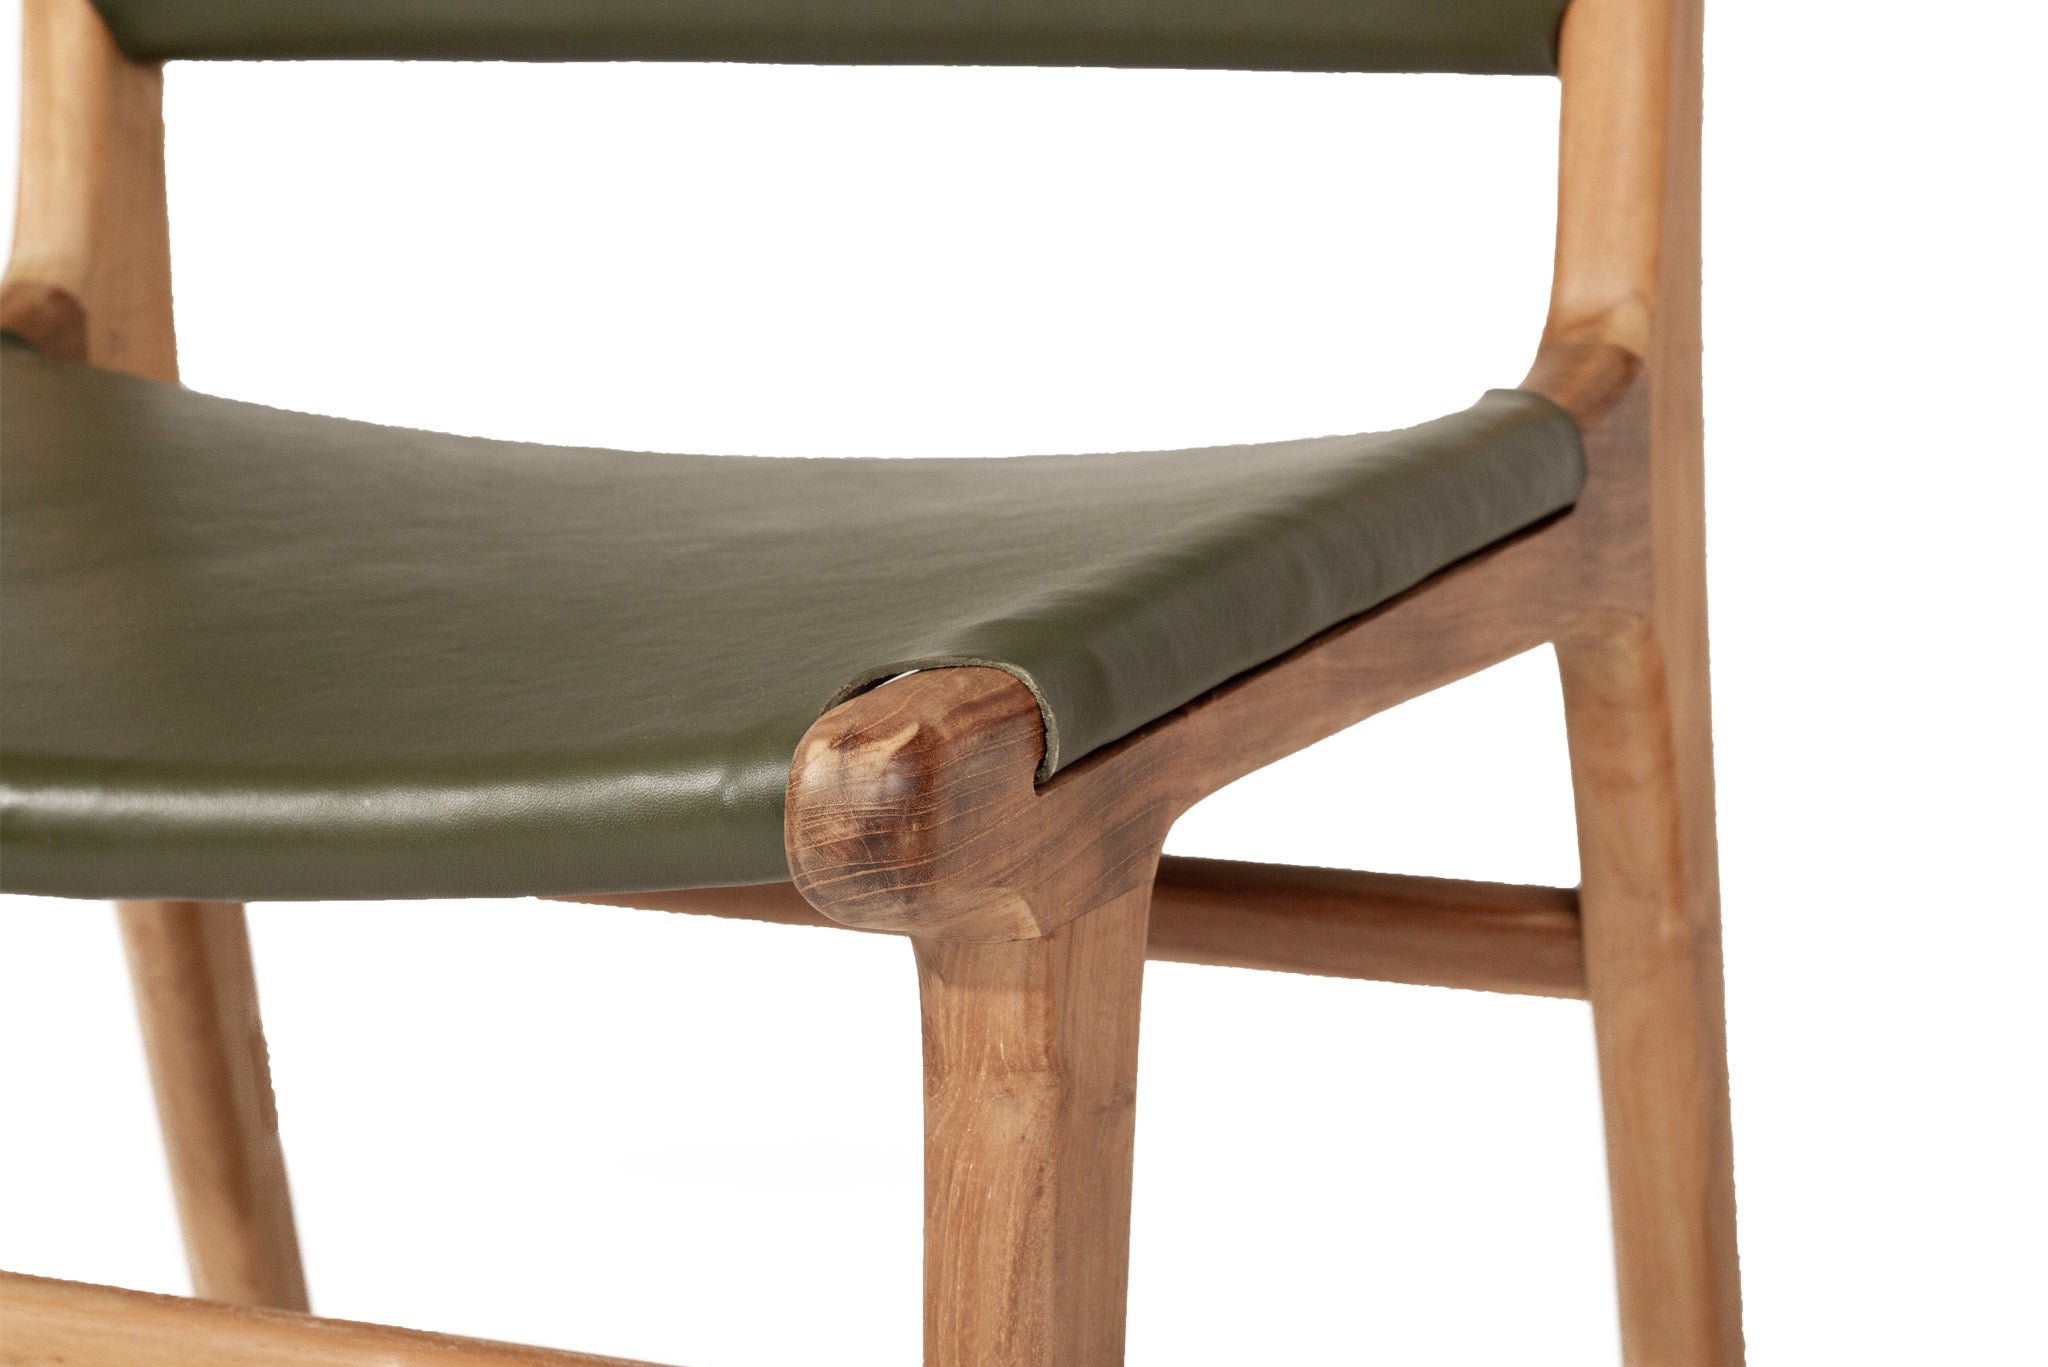 South Bank Leather Side Chair – Olive